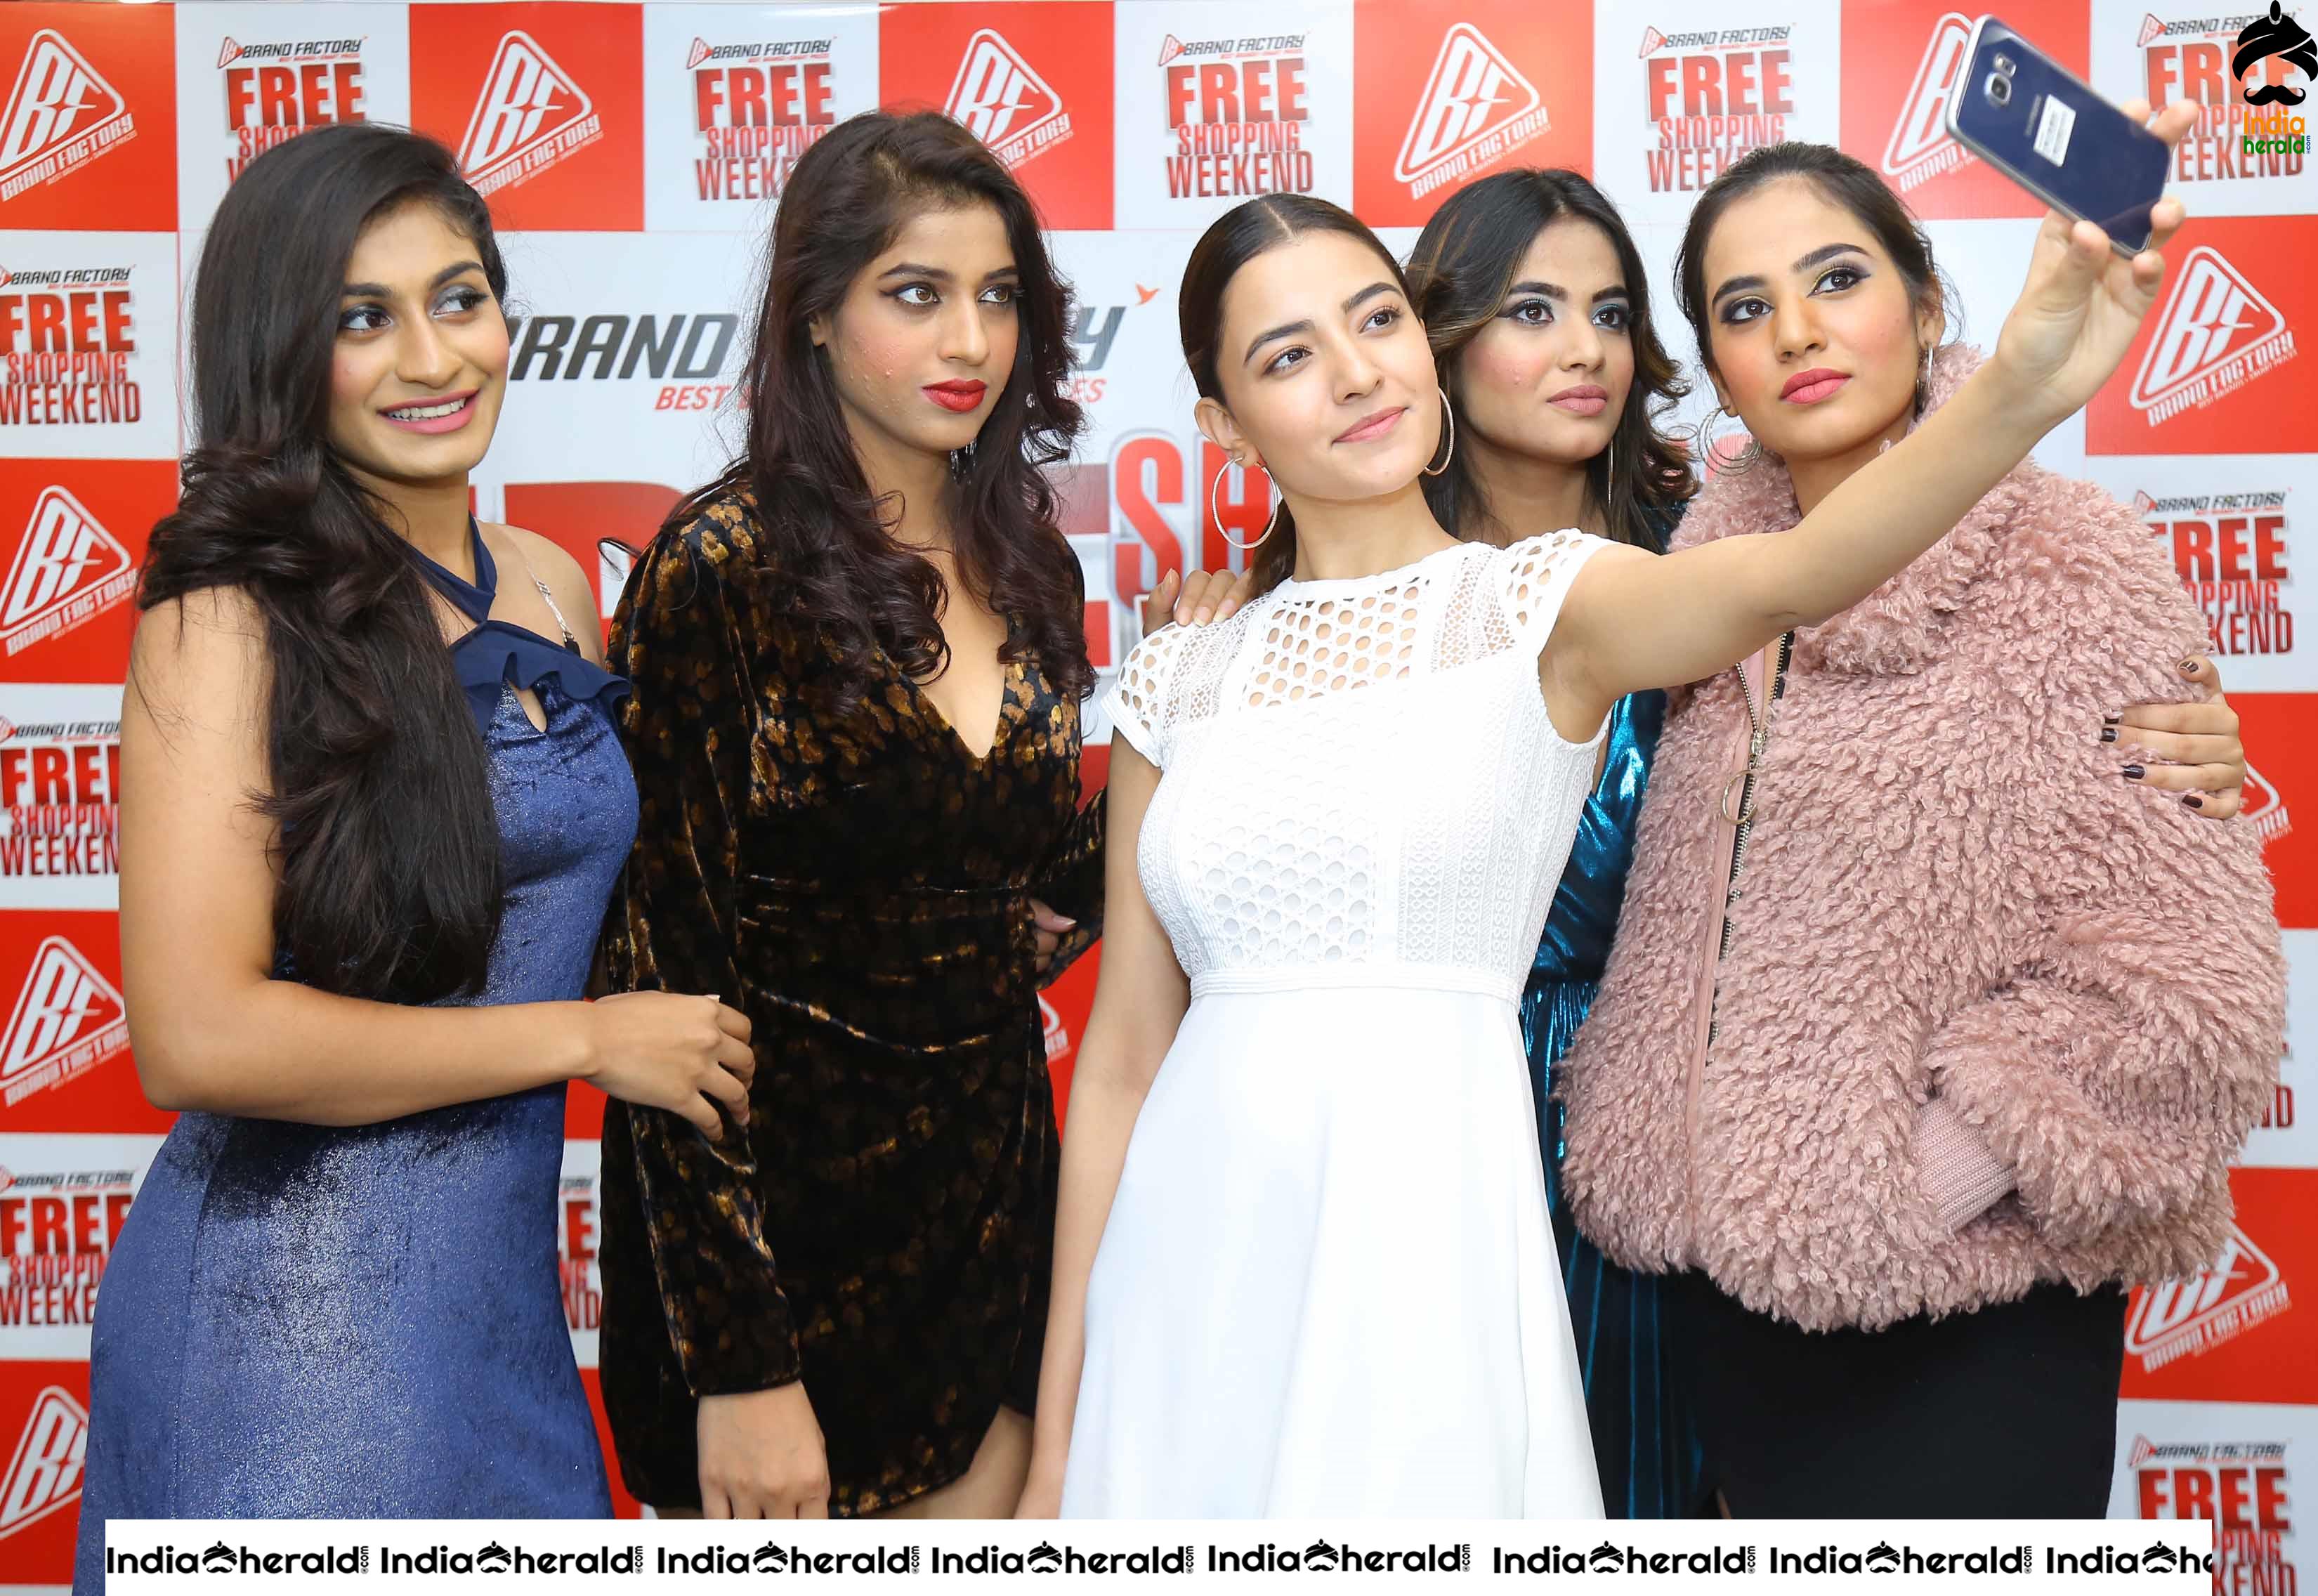 Hebah Patel and Rukshar Dillon Unveils Poster at Pre Launch Celebrations of Free Shopping Weekend by BRAND FACTORY Set 1